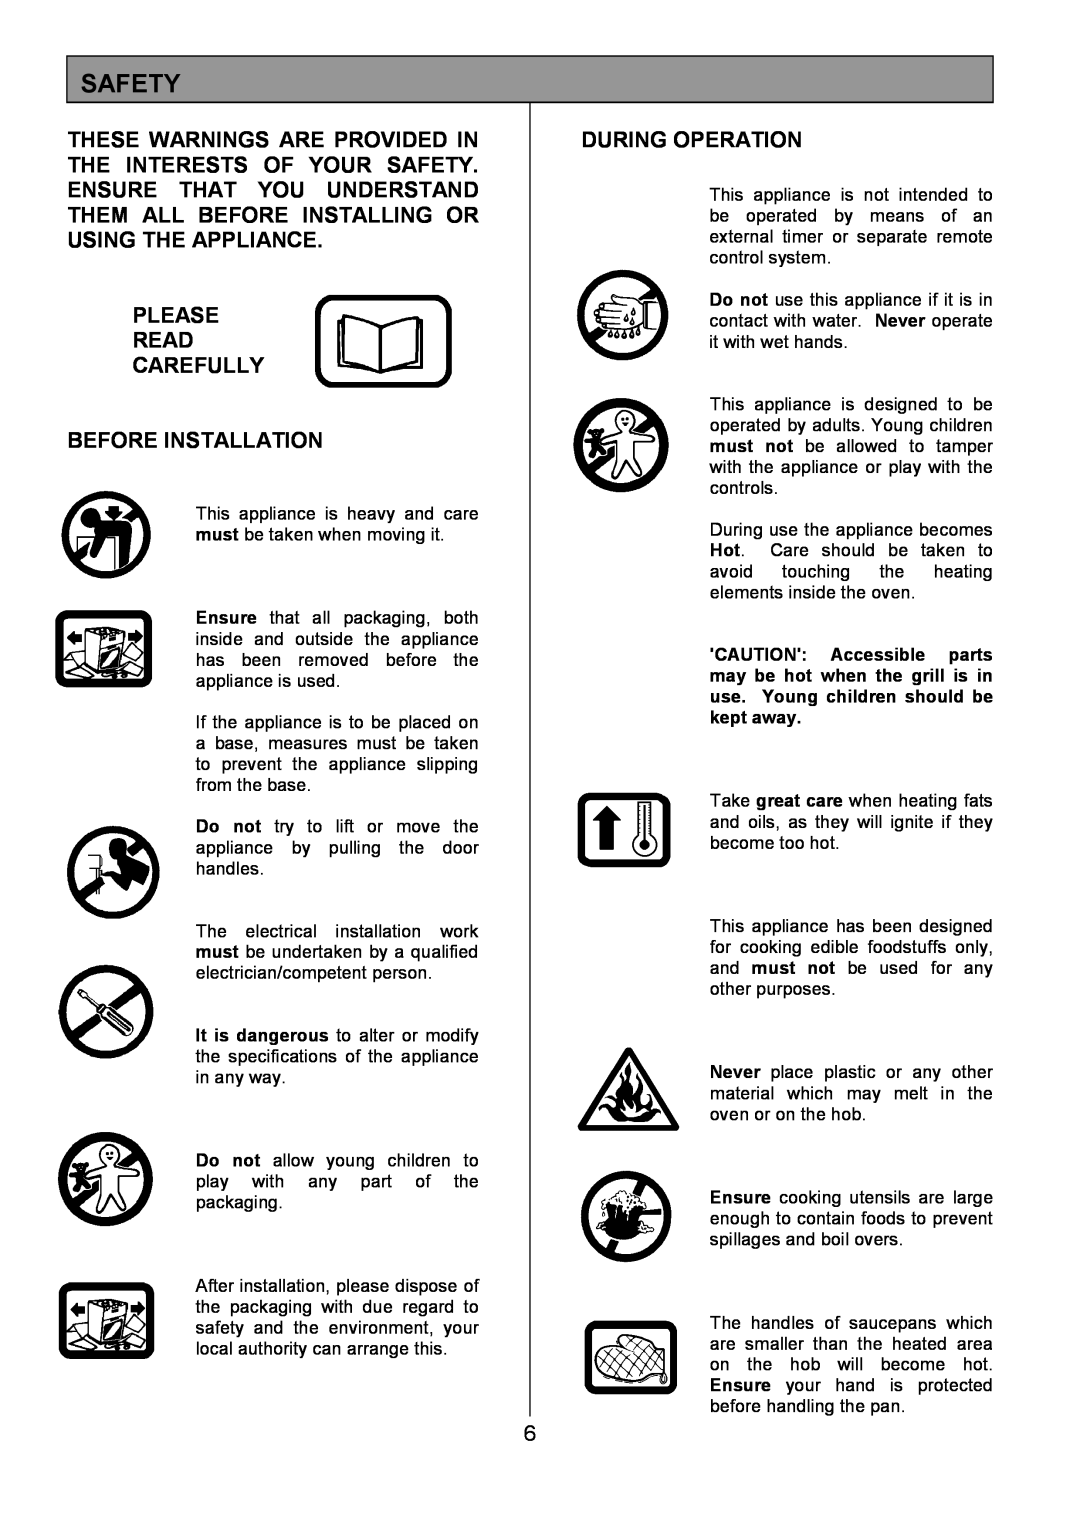 Tricity Bendix SIE305 installation instructions Safety, Please Read Carefully Before Installation, During Operation 